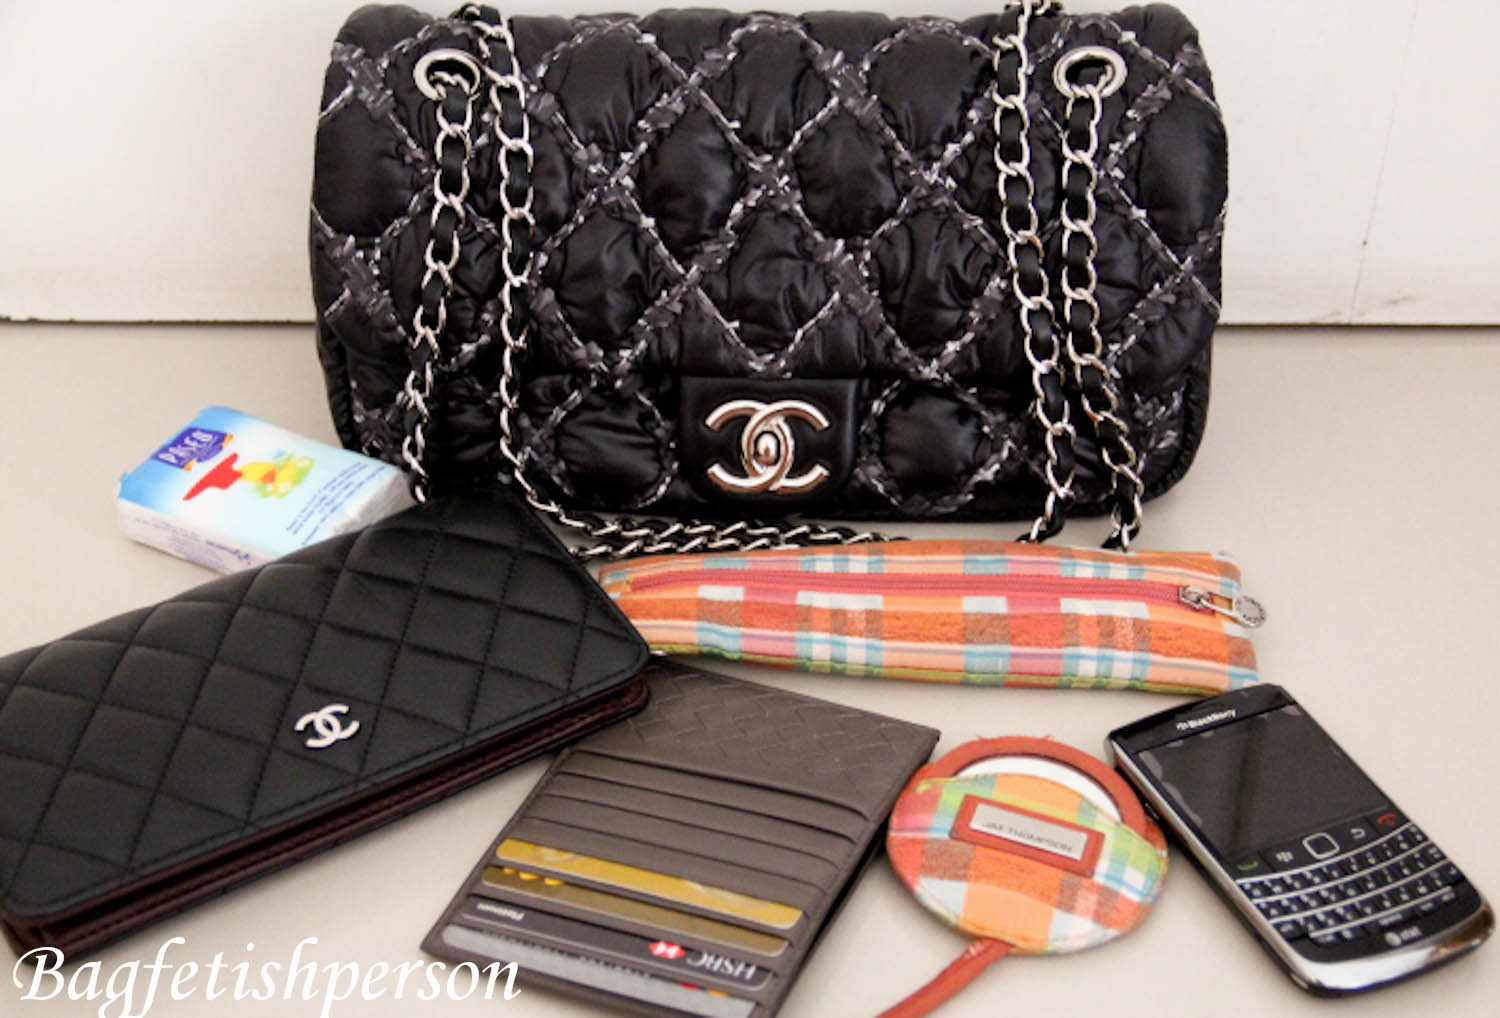 bagfetishperson: How to store Chanel flap bag